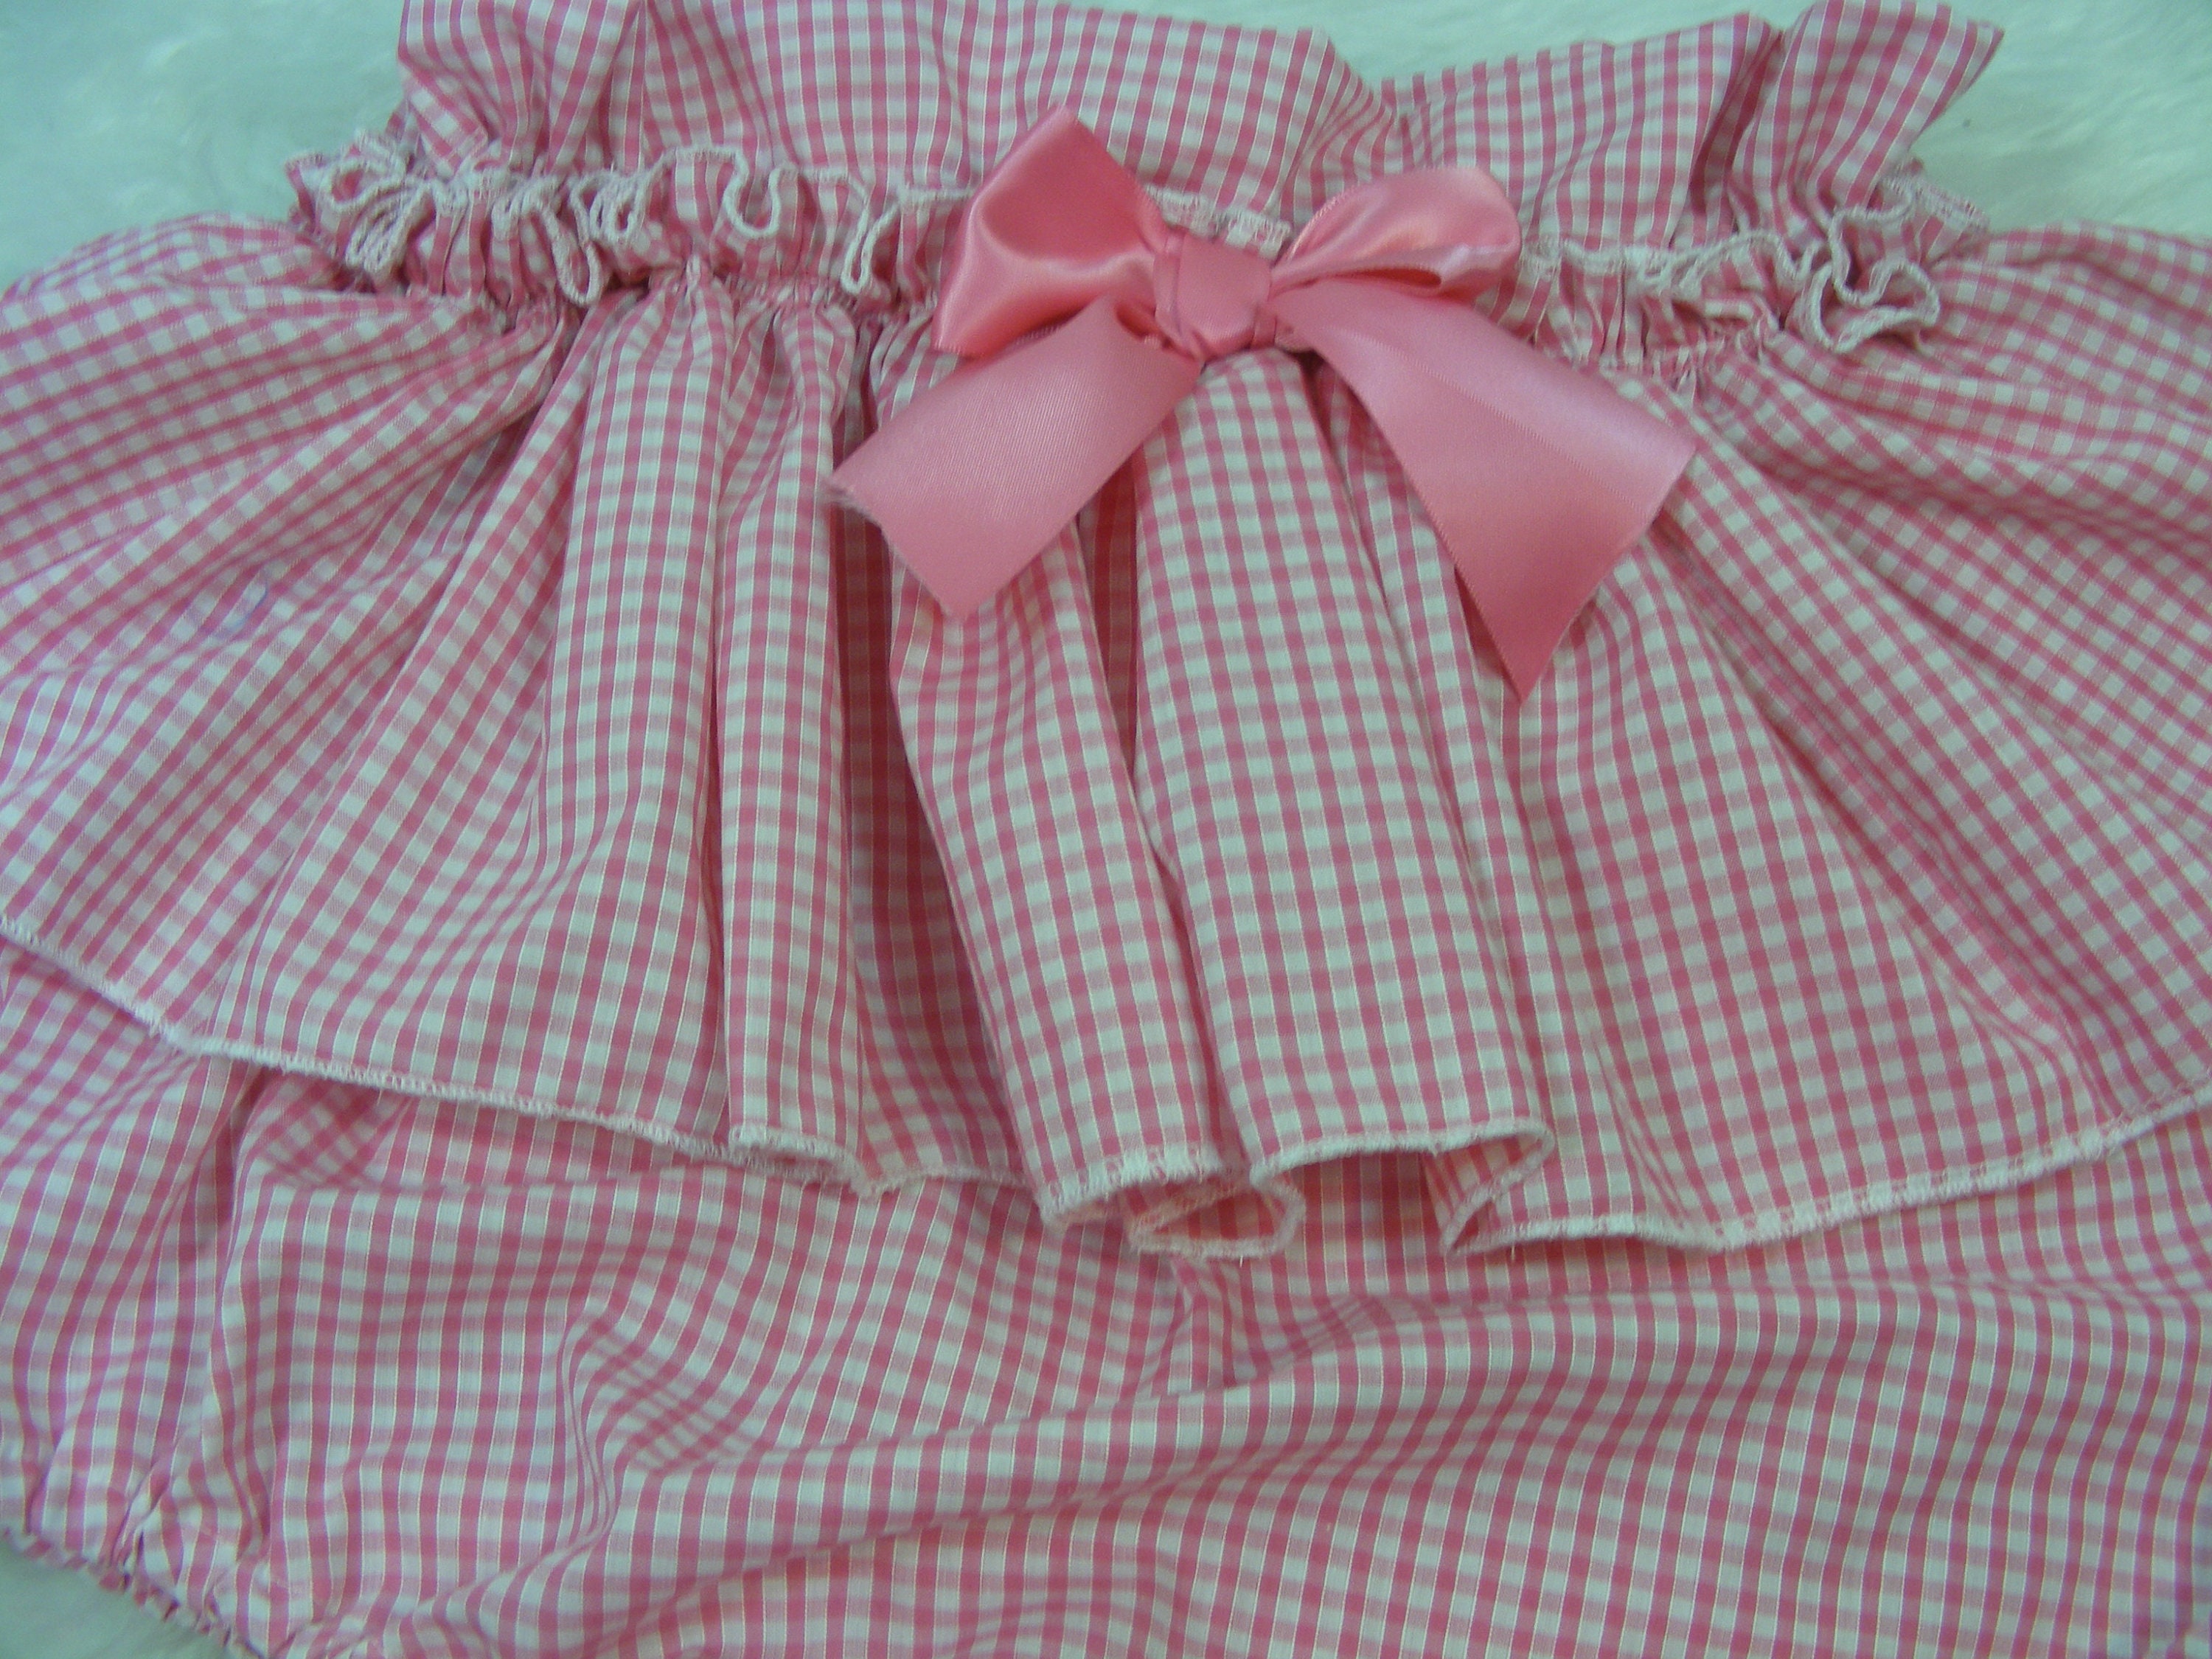 Adult Baby Sissy Abdl Pink Small Squared Gingham Cotton Diaper - Etsy